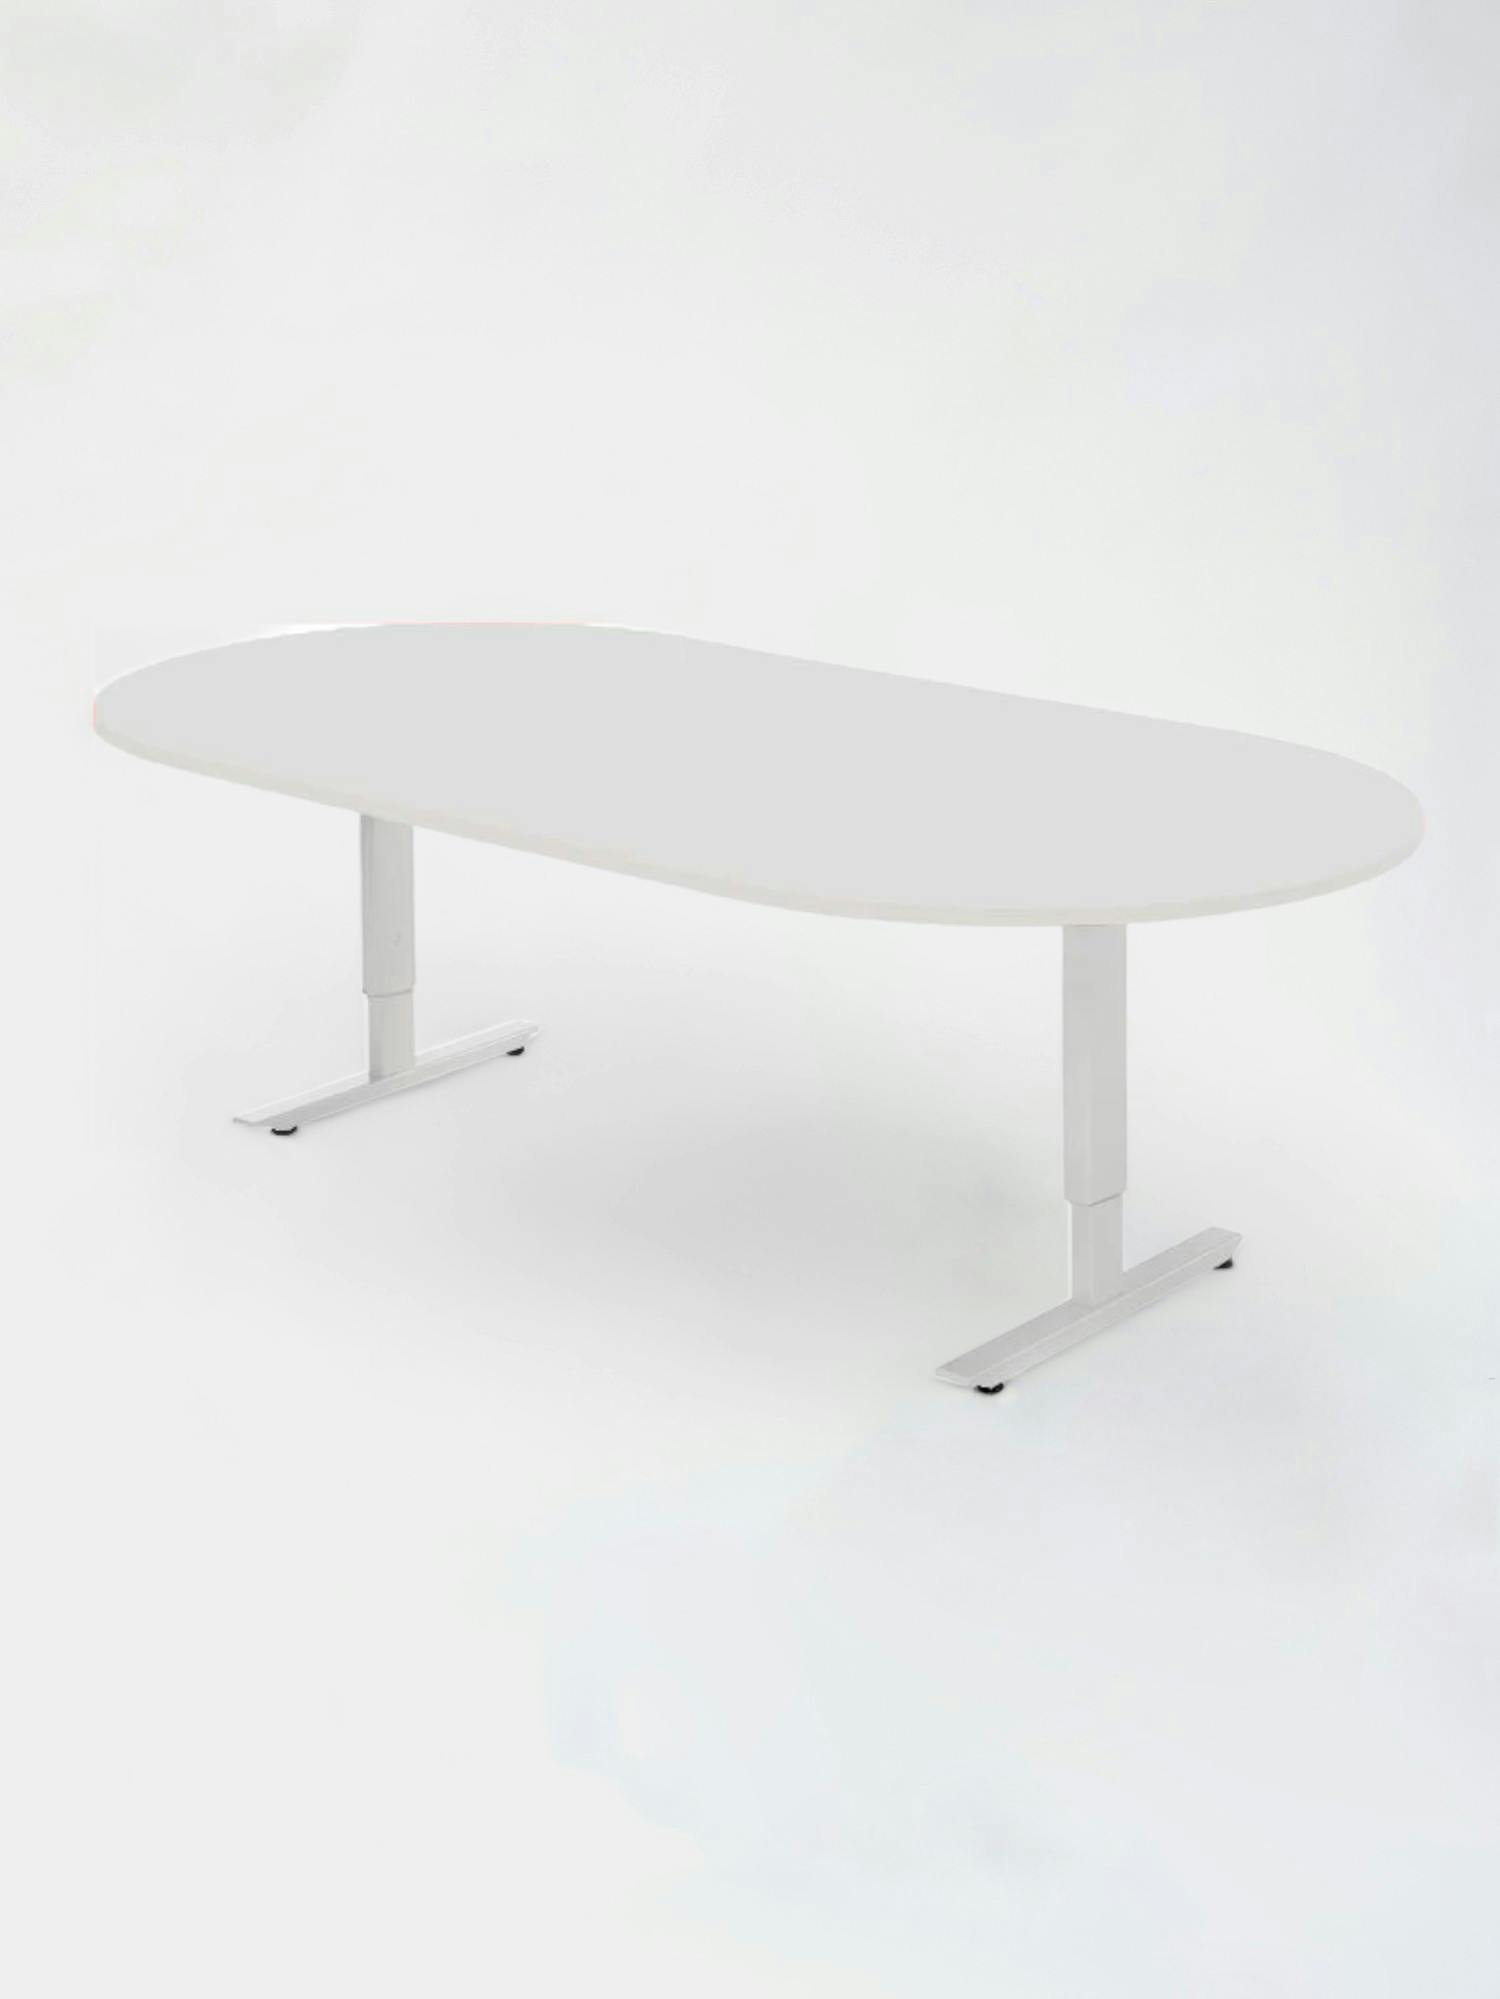 Oval meeting table, white top, white legs - Relieve Furniture